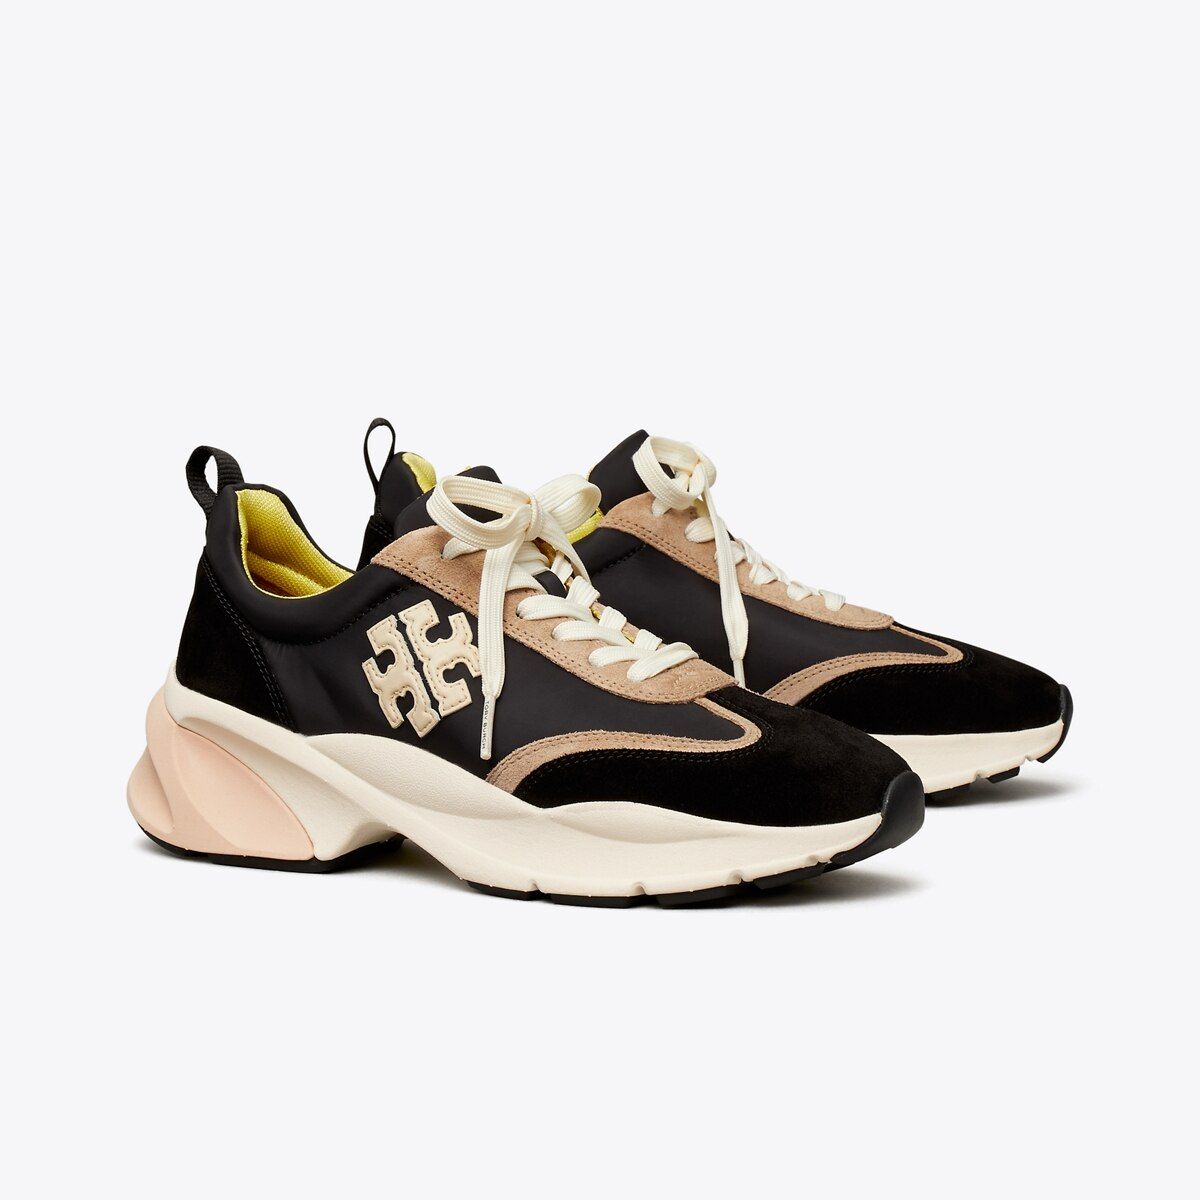 GOOD LUCK TRAINER | Tory Burch (US)